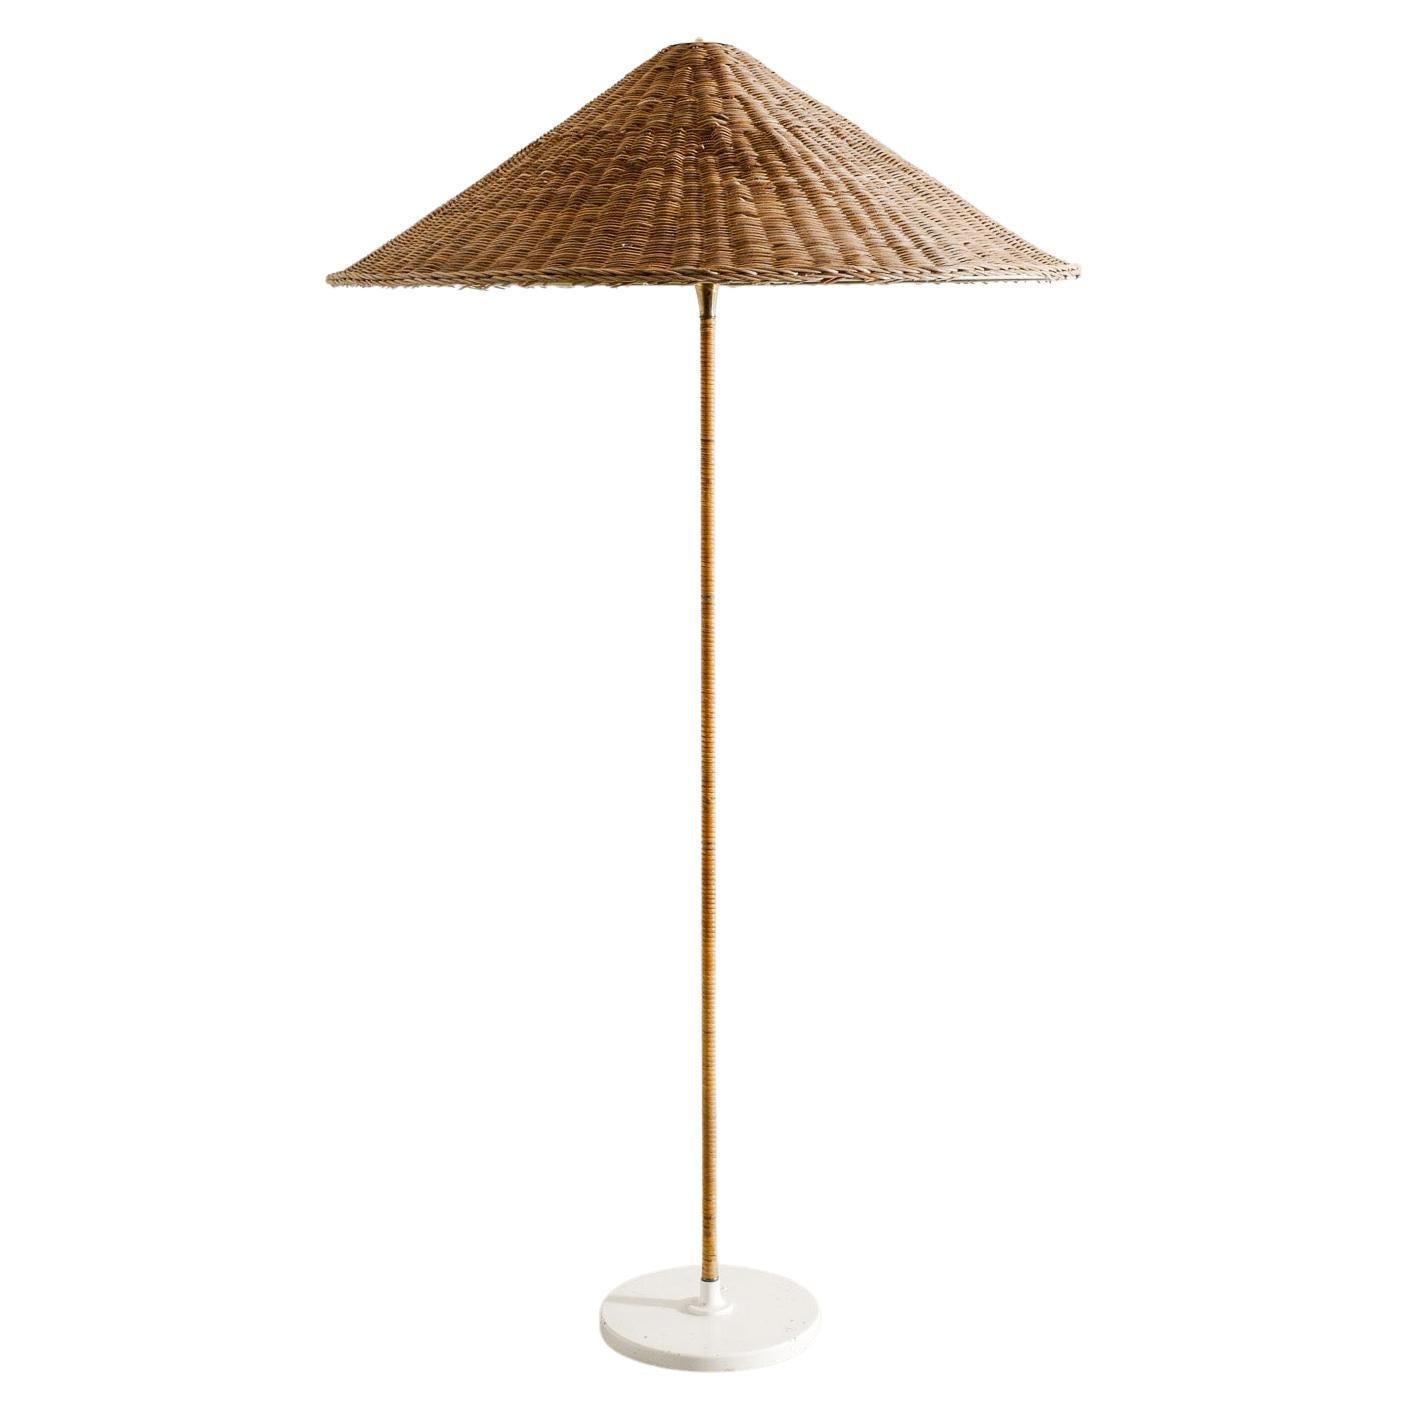 Finnish Mid Century Floor Lamp by Itsu in the style of Paavo Tynell 9202, 1940s  For Sale